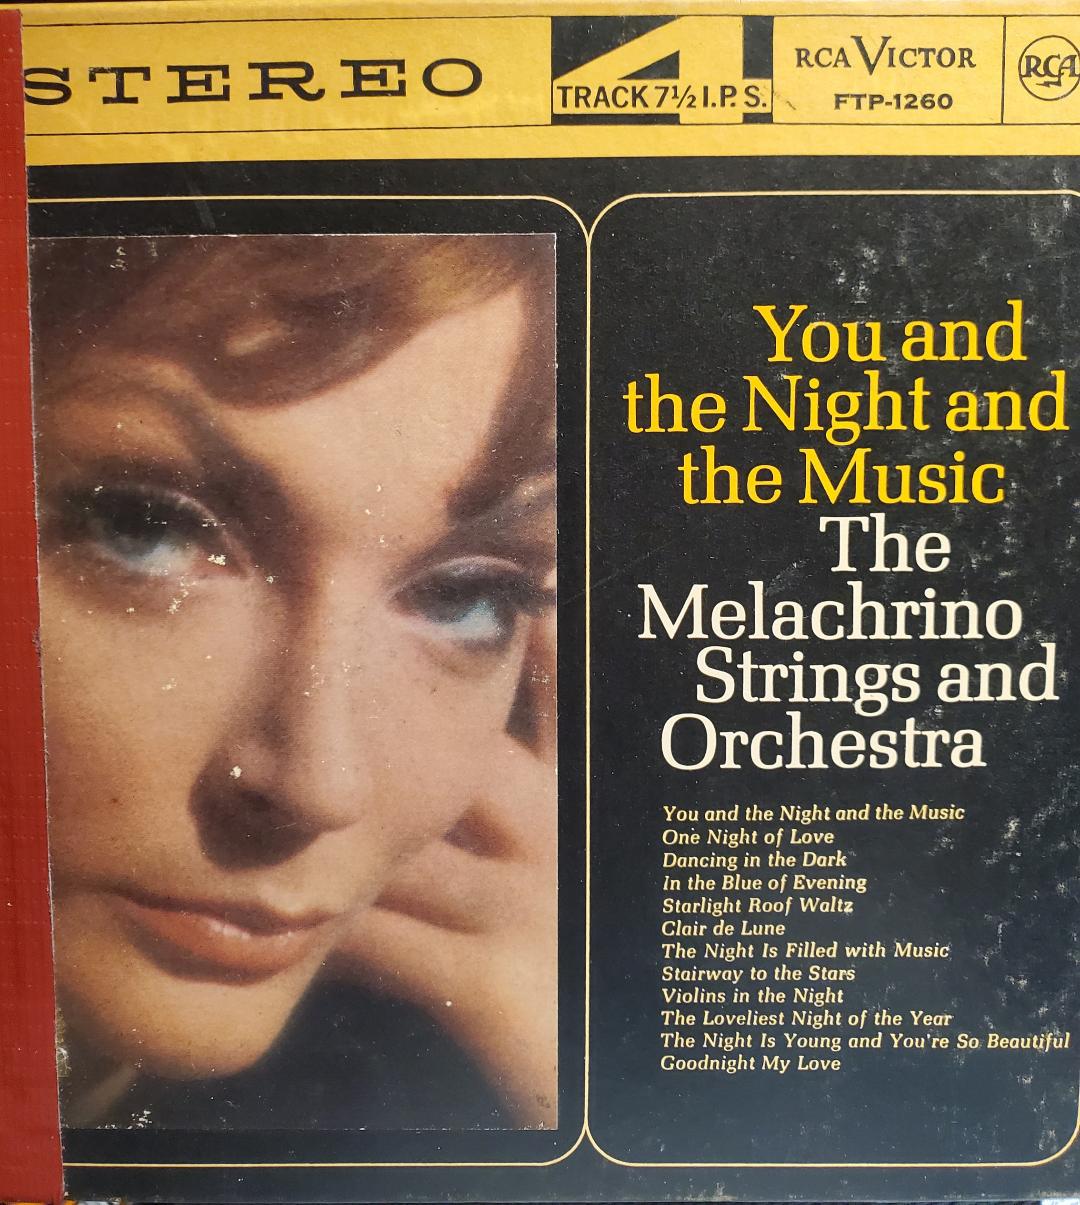 Art for Violins In The Night by The Melachrino Strings And Orchestra